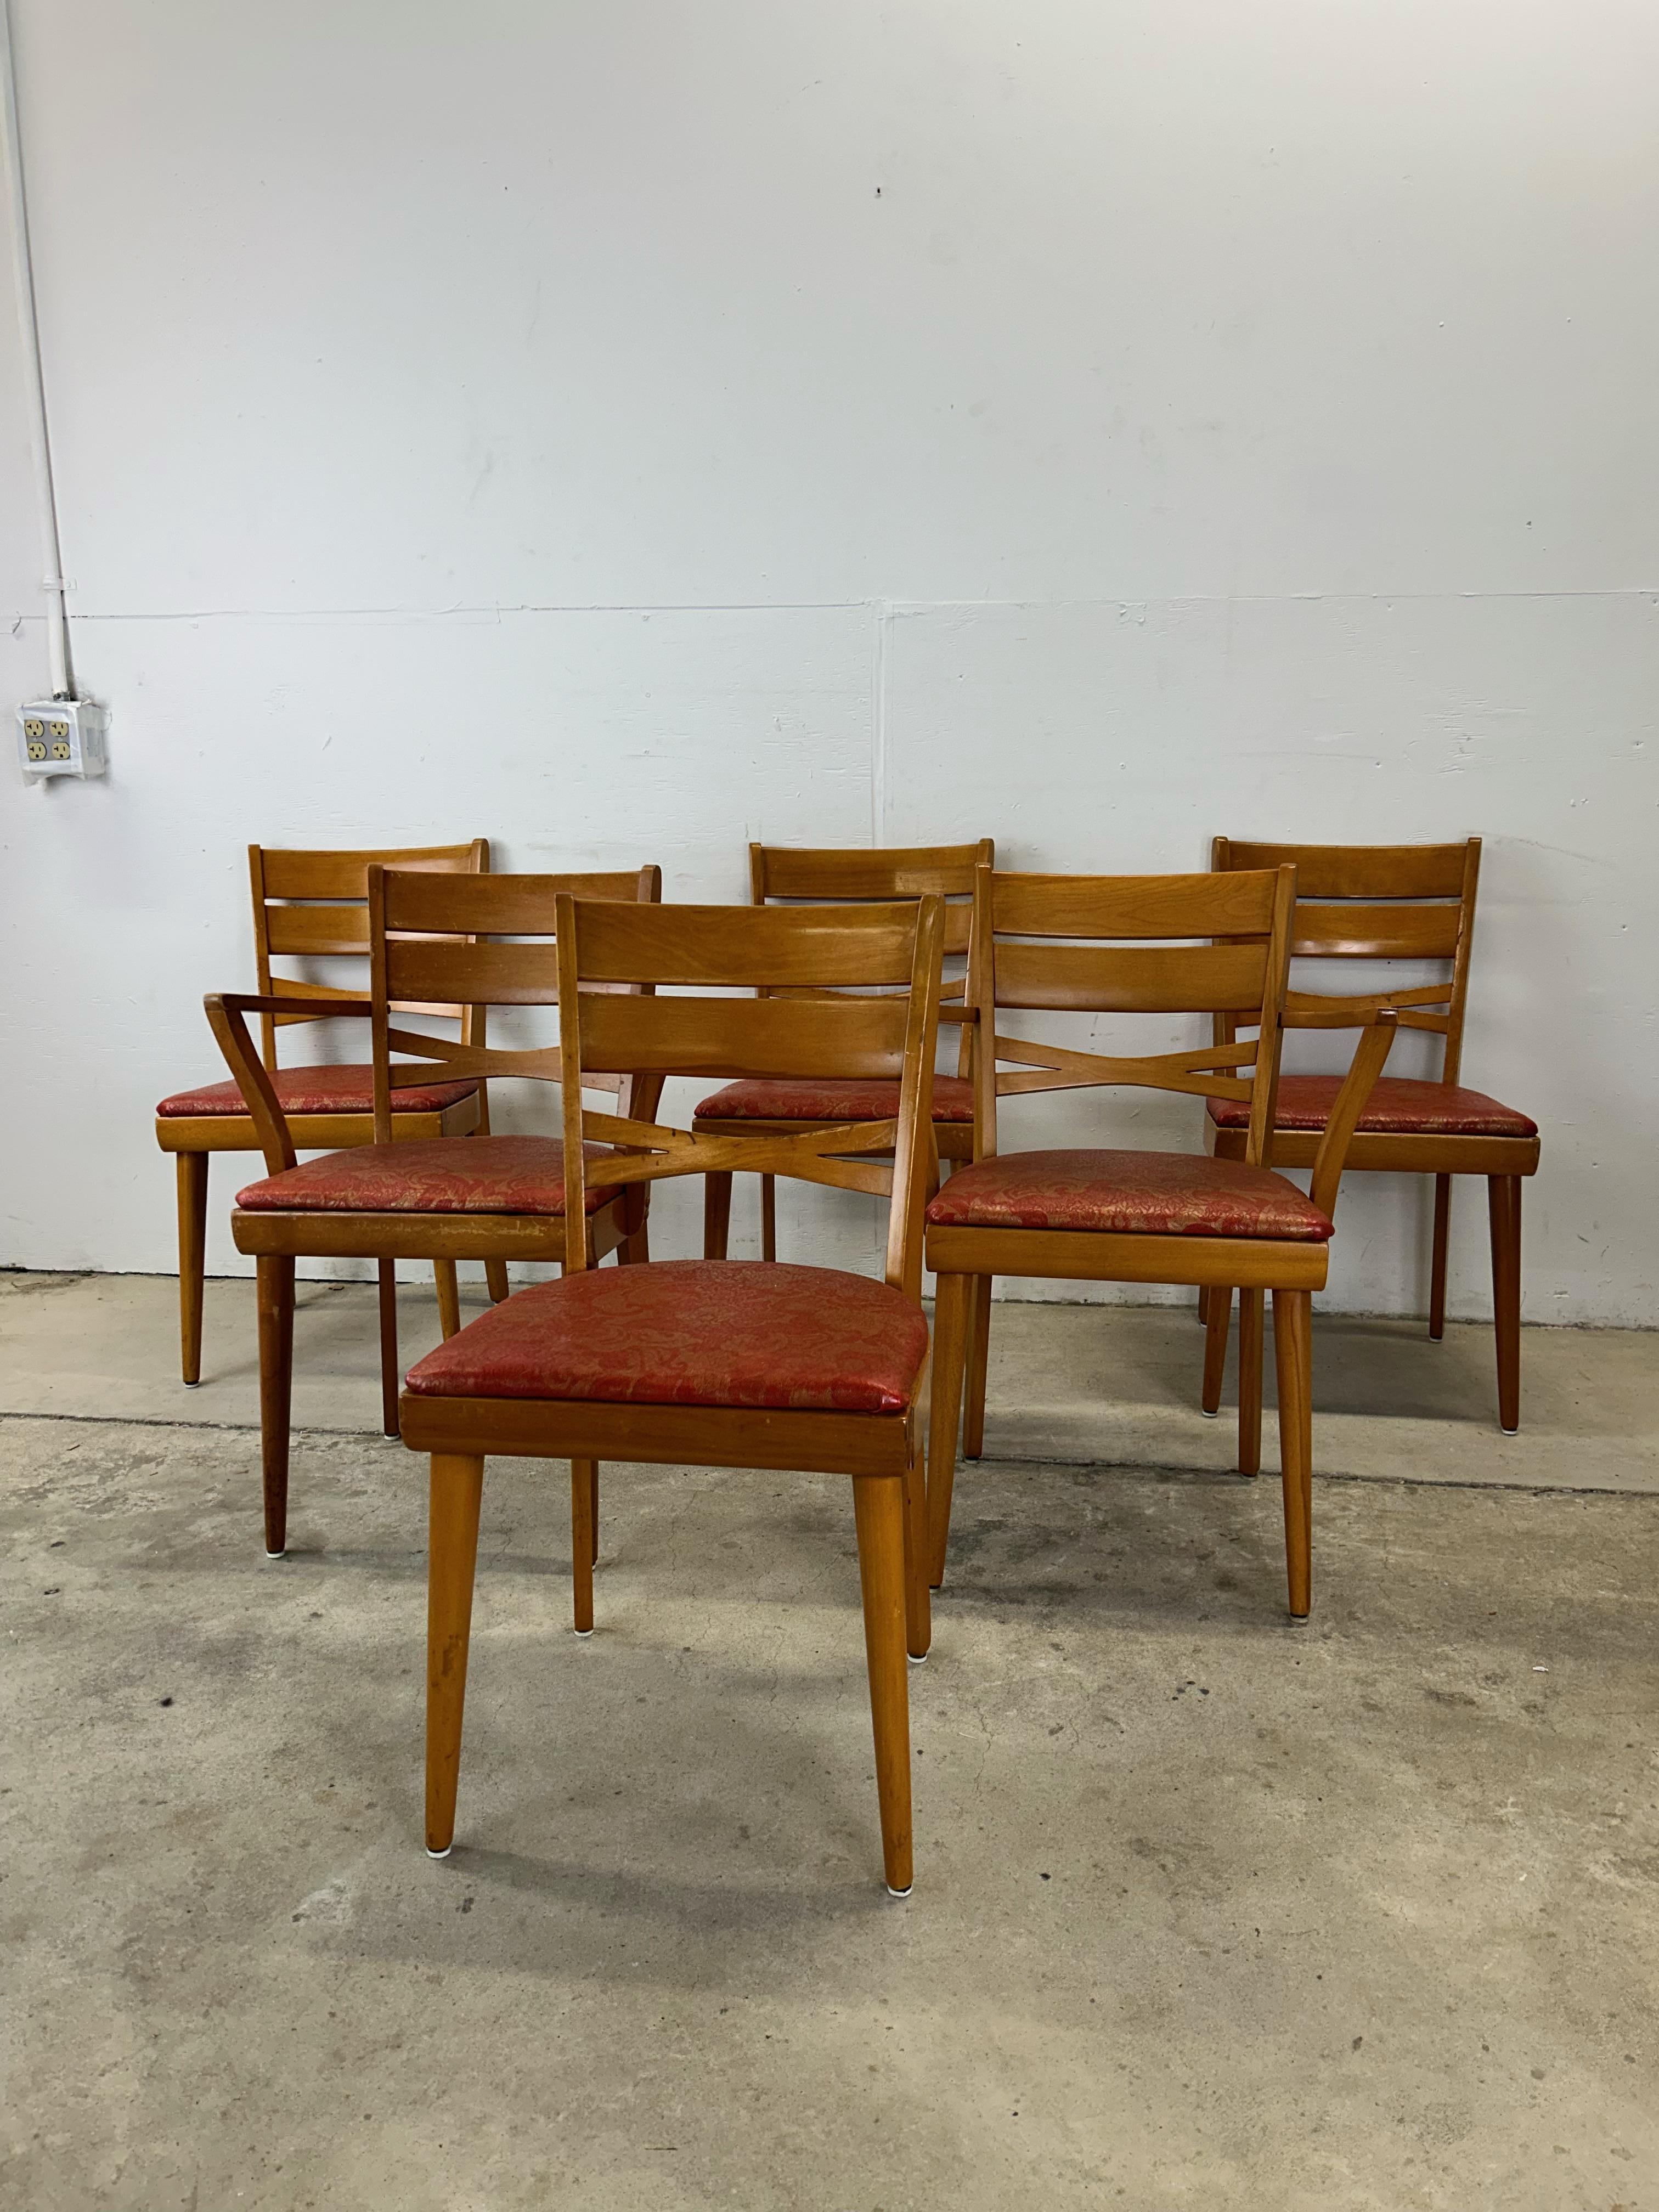 This set of six mid century modern dining chairs in the style of Heywood Wakefield feature hardwood construction, original maple finish, vintage red patterned uphosltery, two arm chairs and four side chairs with tall tapered legs.

Matching maple